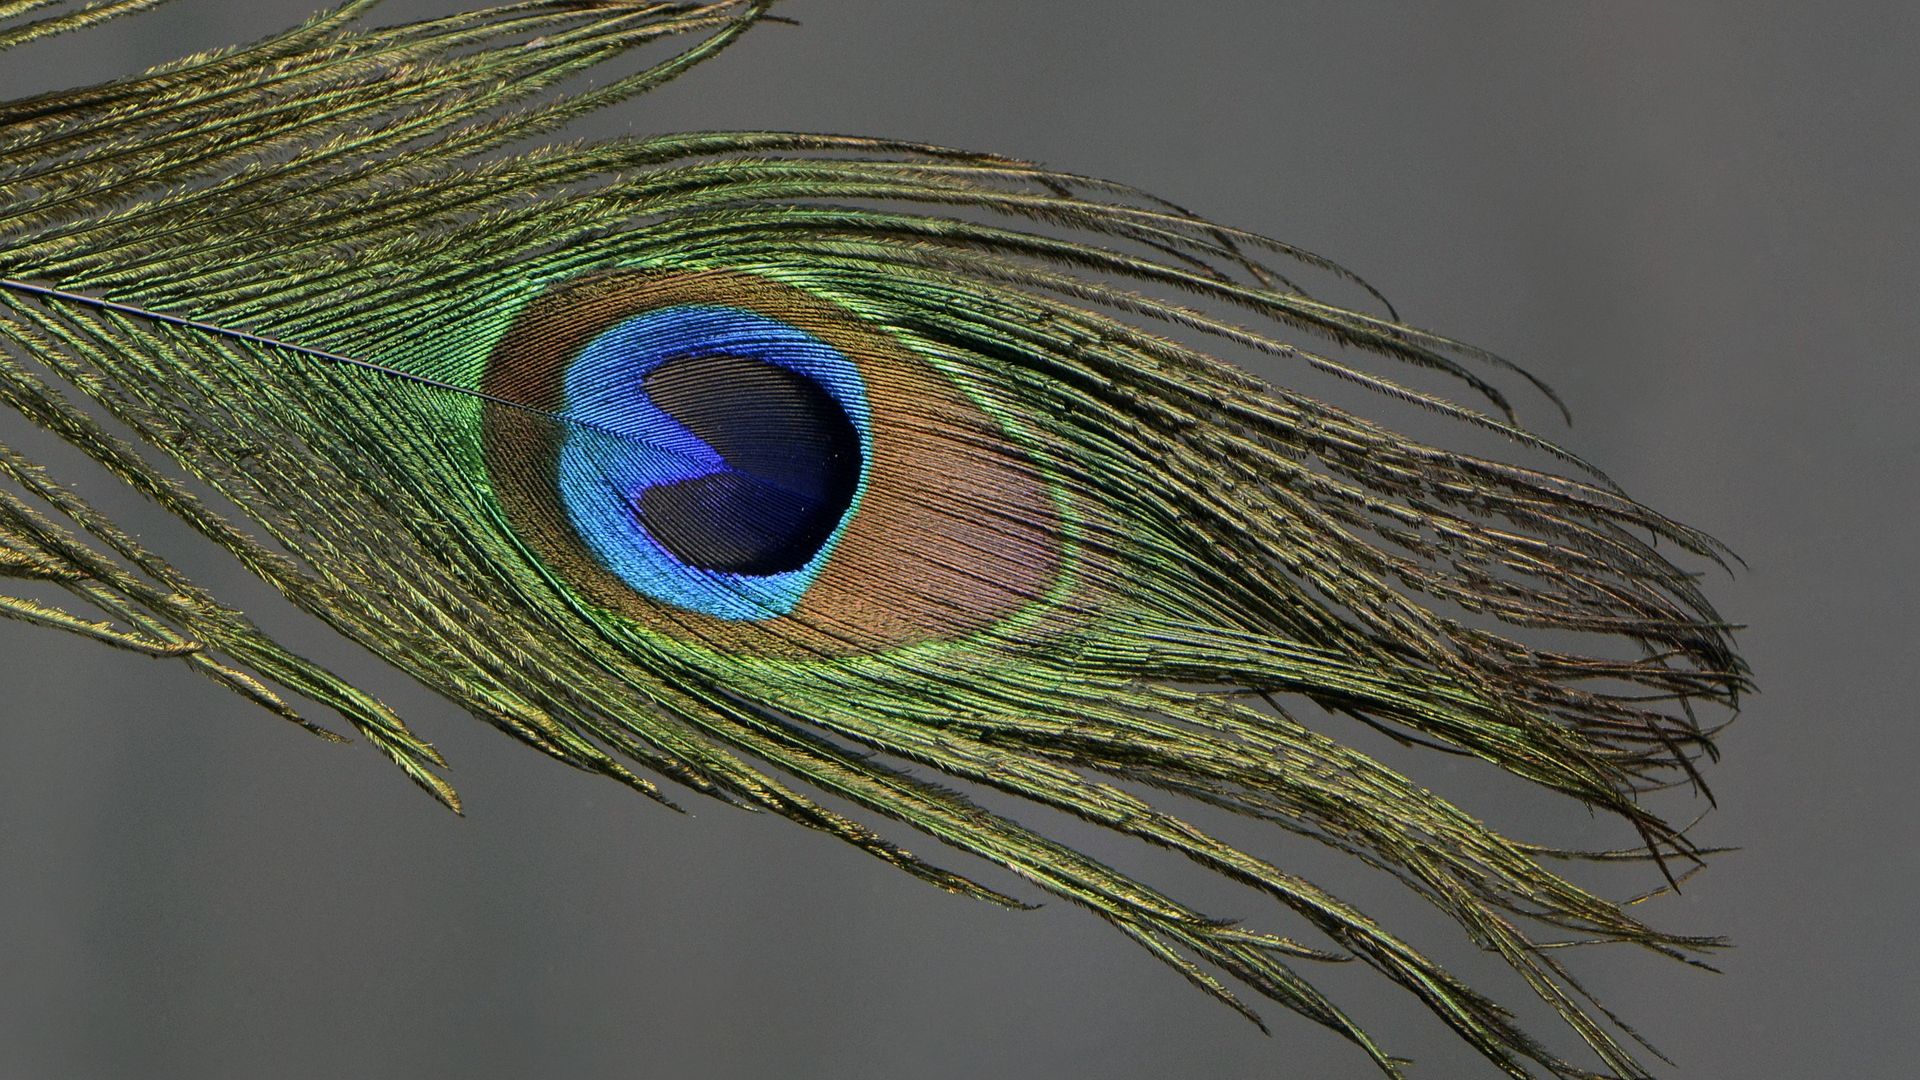 Desktop Wallpaper Peacock Feather, Hd Image, Picture, Background, B1wksp